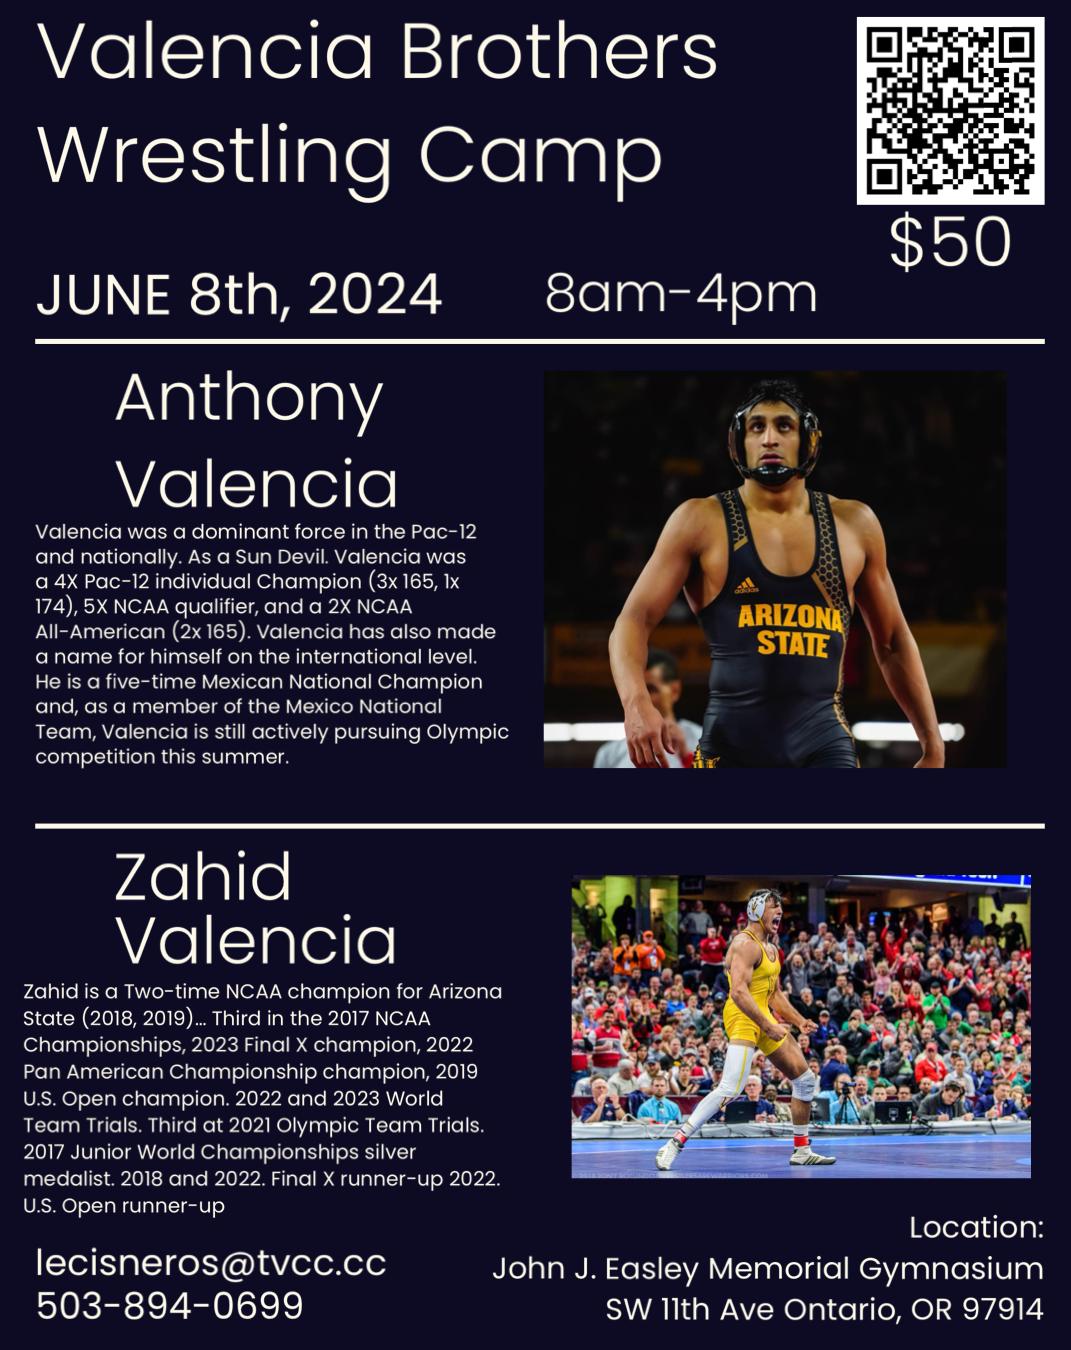 TVCC Wrestling Presents: Valencia Brothers Wrestling Camp on June 8th